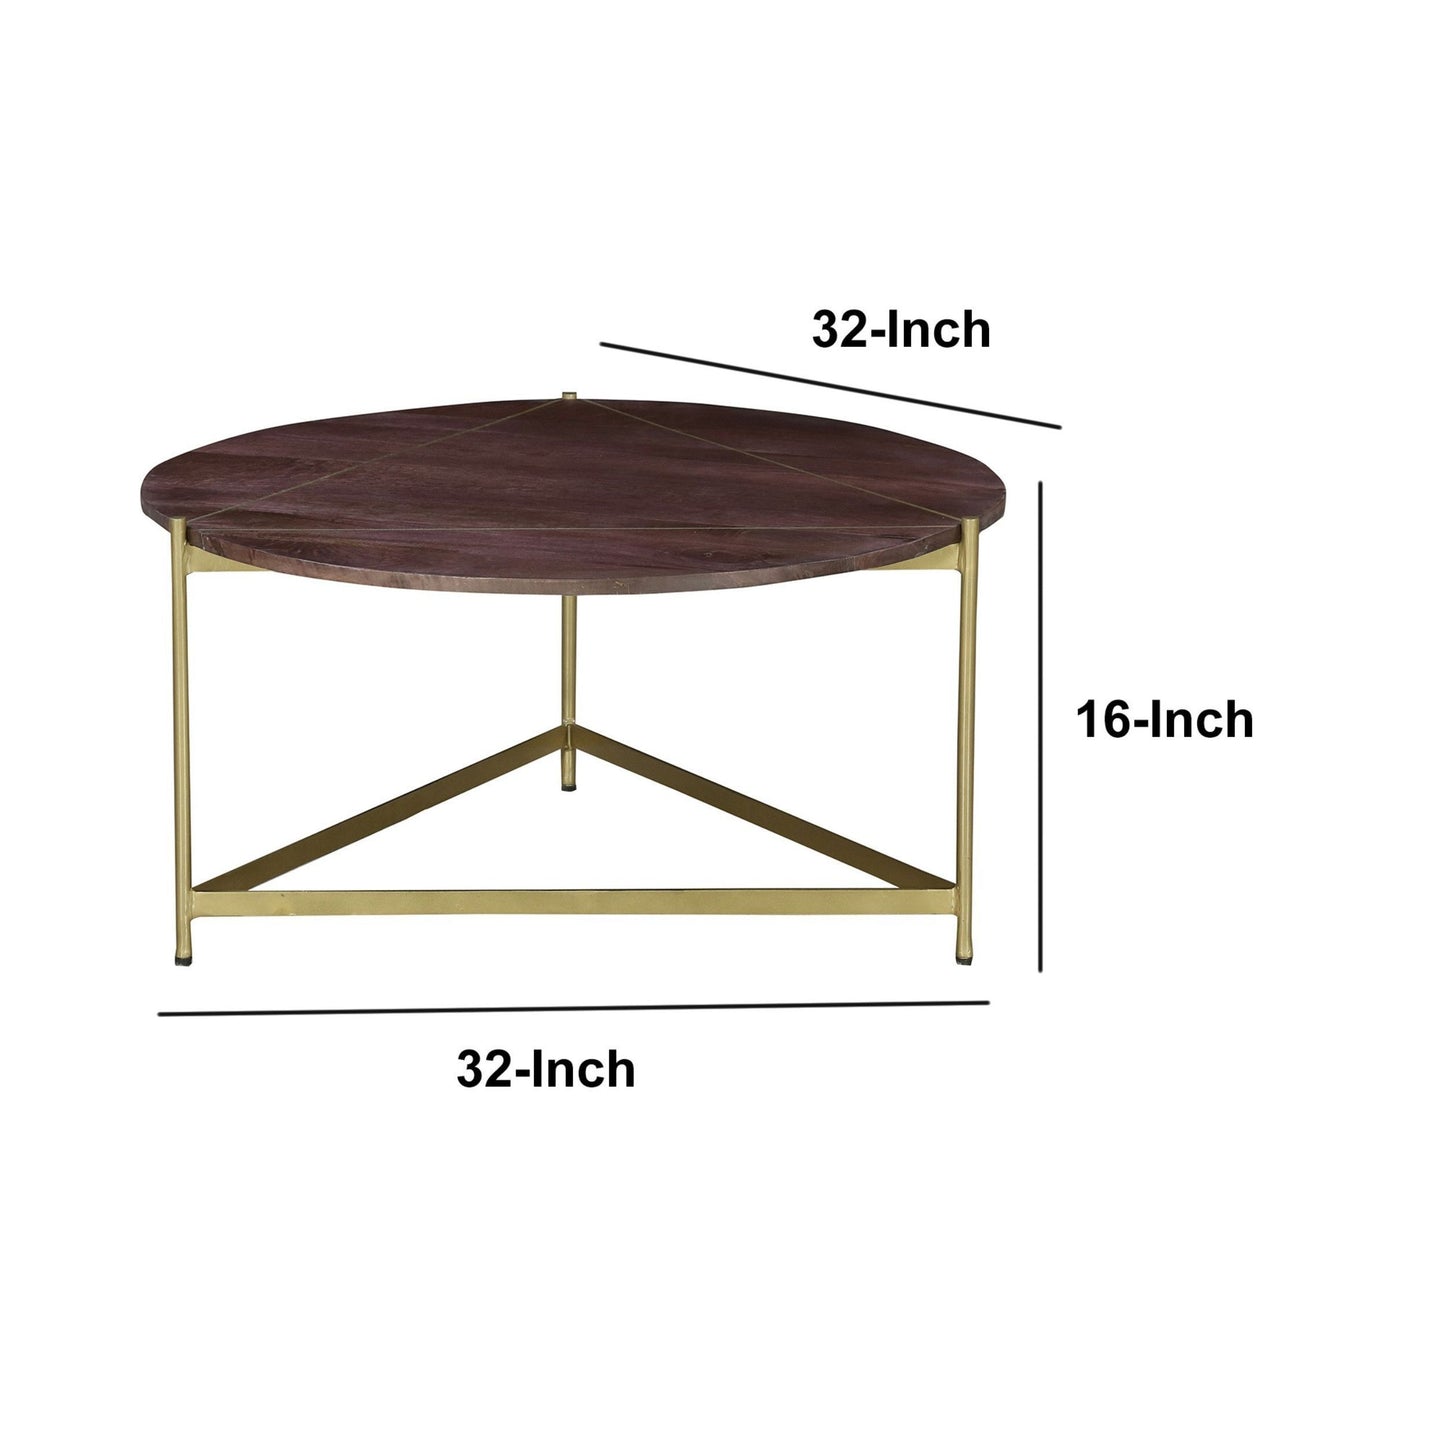 Ellis Round Wood Coffee Table with Brass Metal Base, Dark Brown and Warm Brass